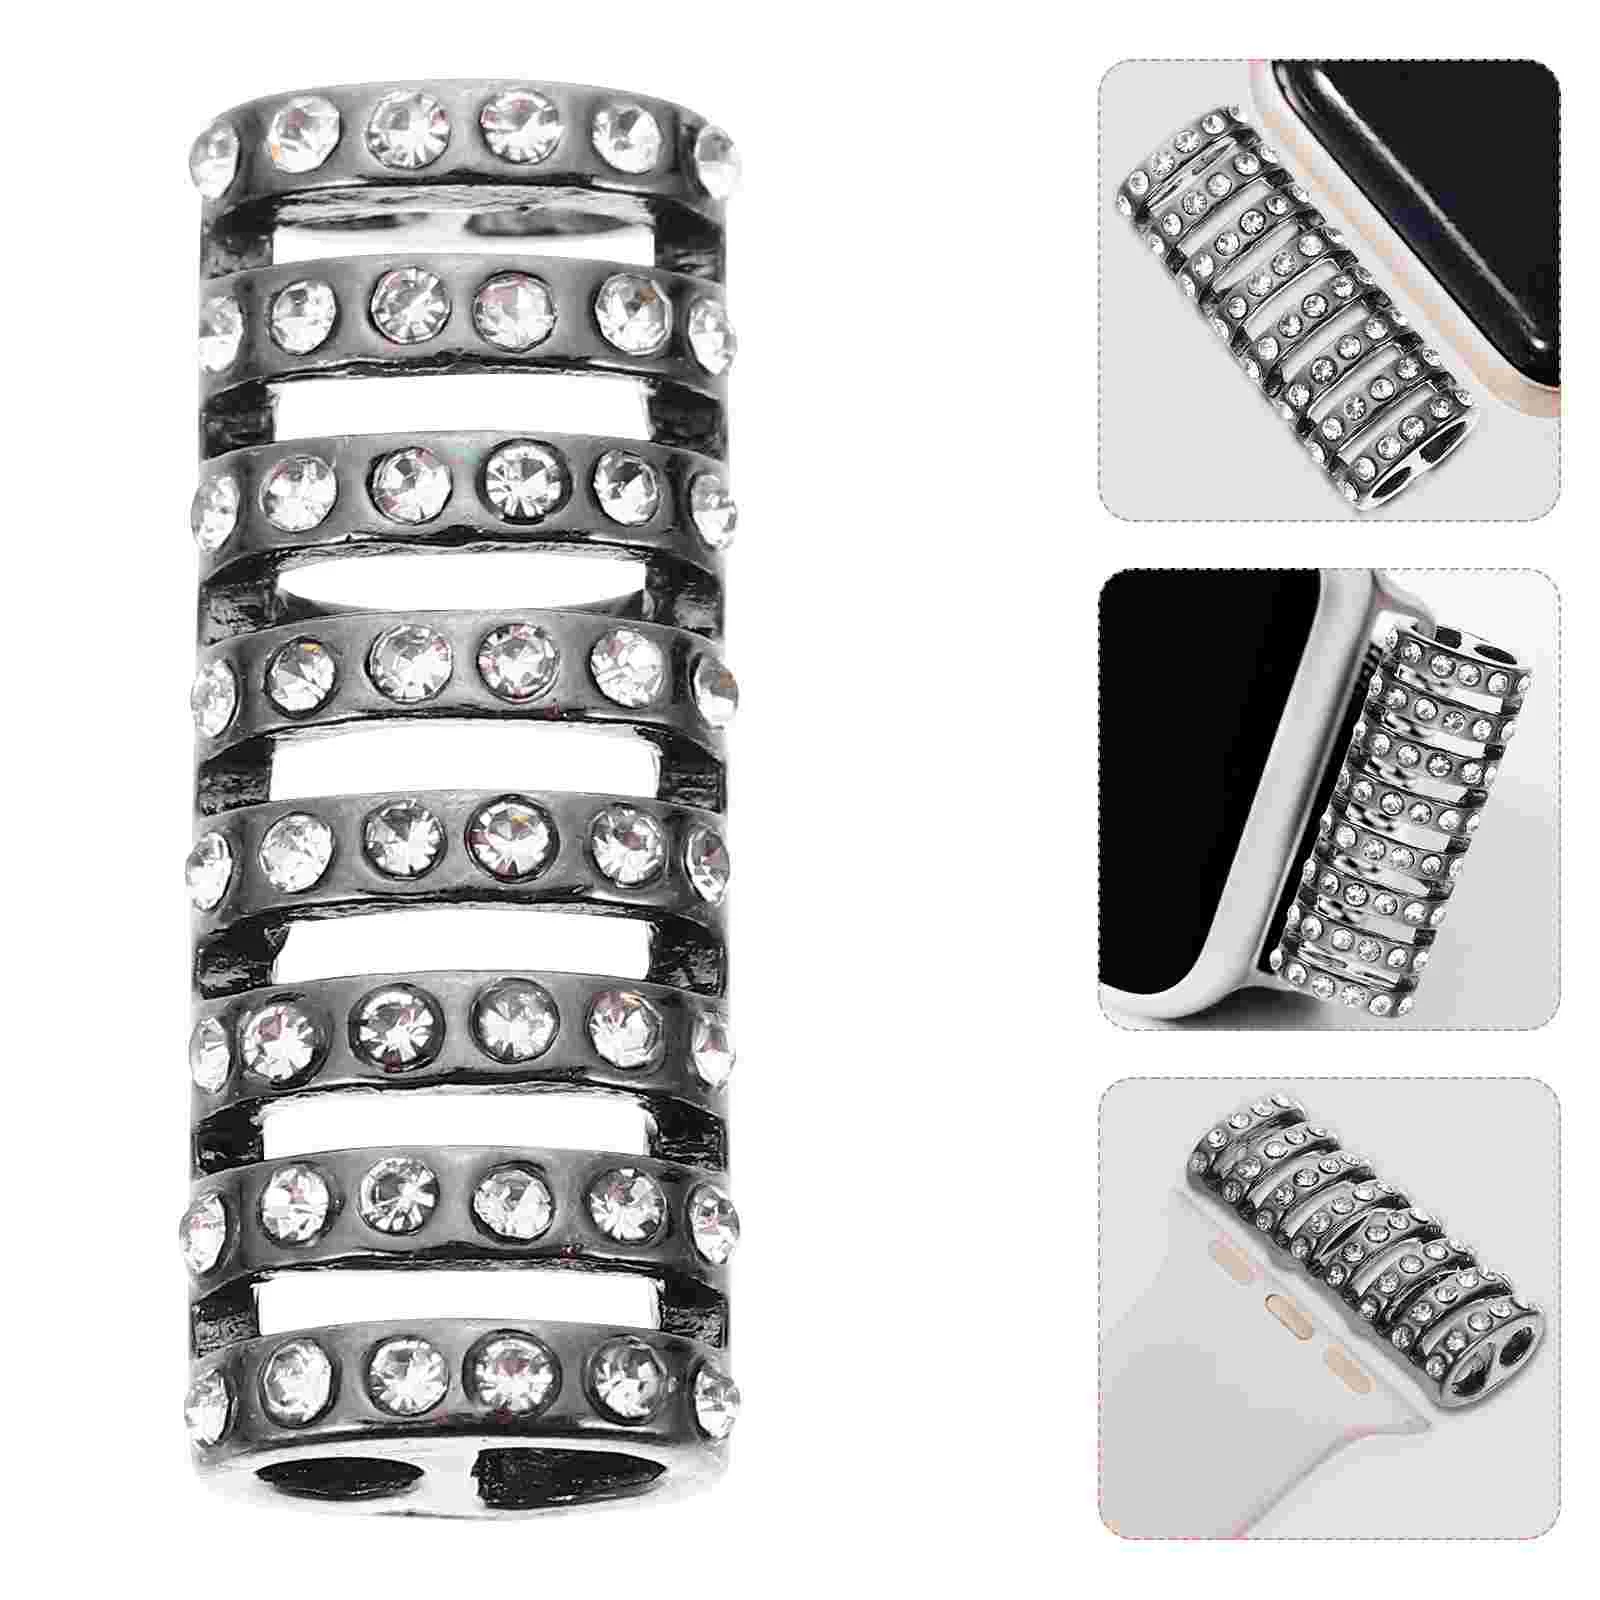 

10 Pcs Strap Connector Watches Delicate Watchband Alloy Adapter Supply Jewelry Decorative